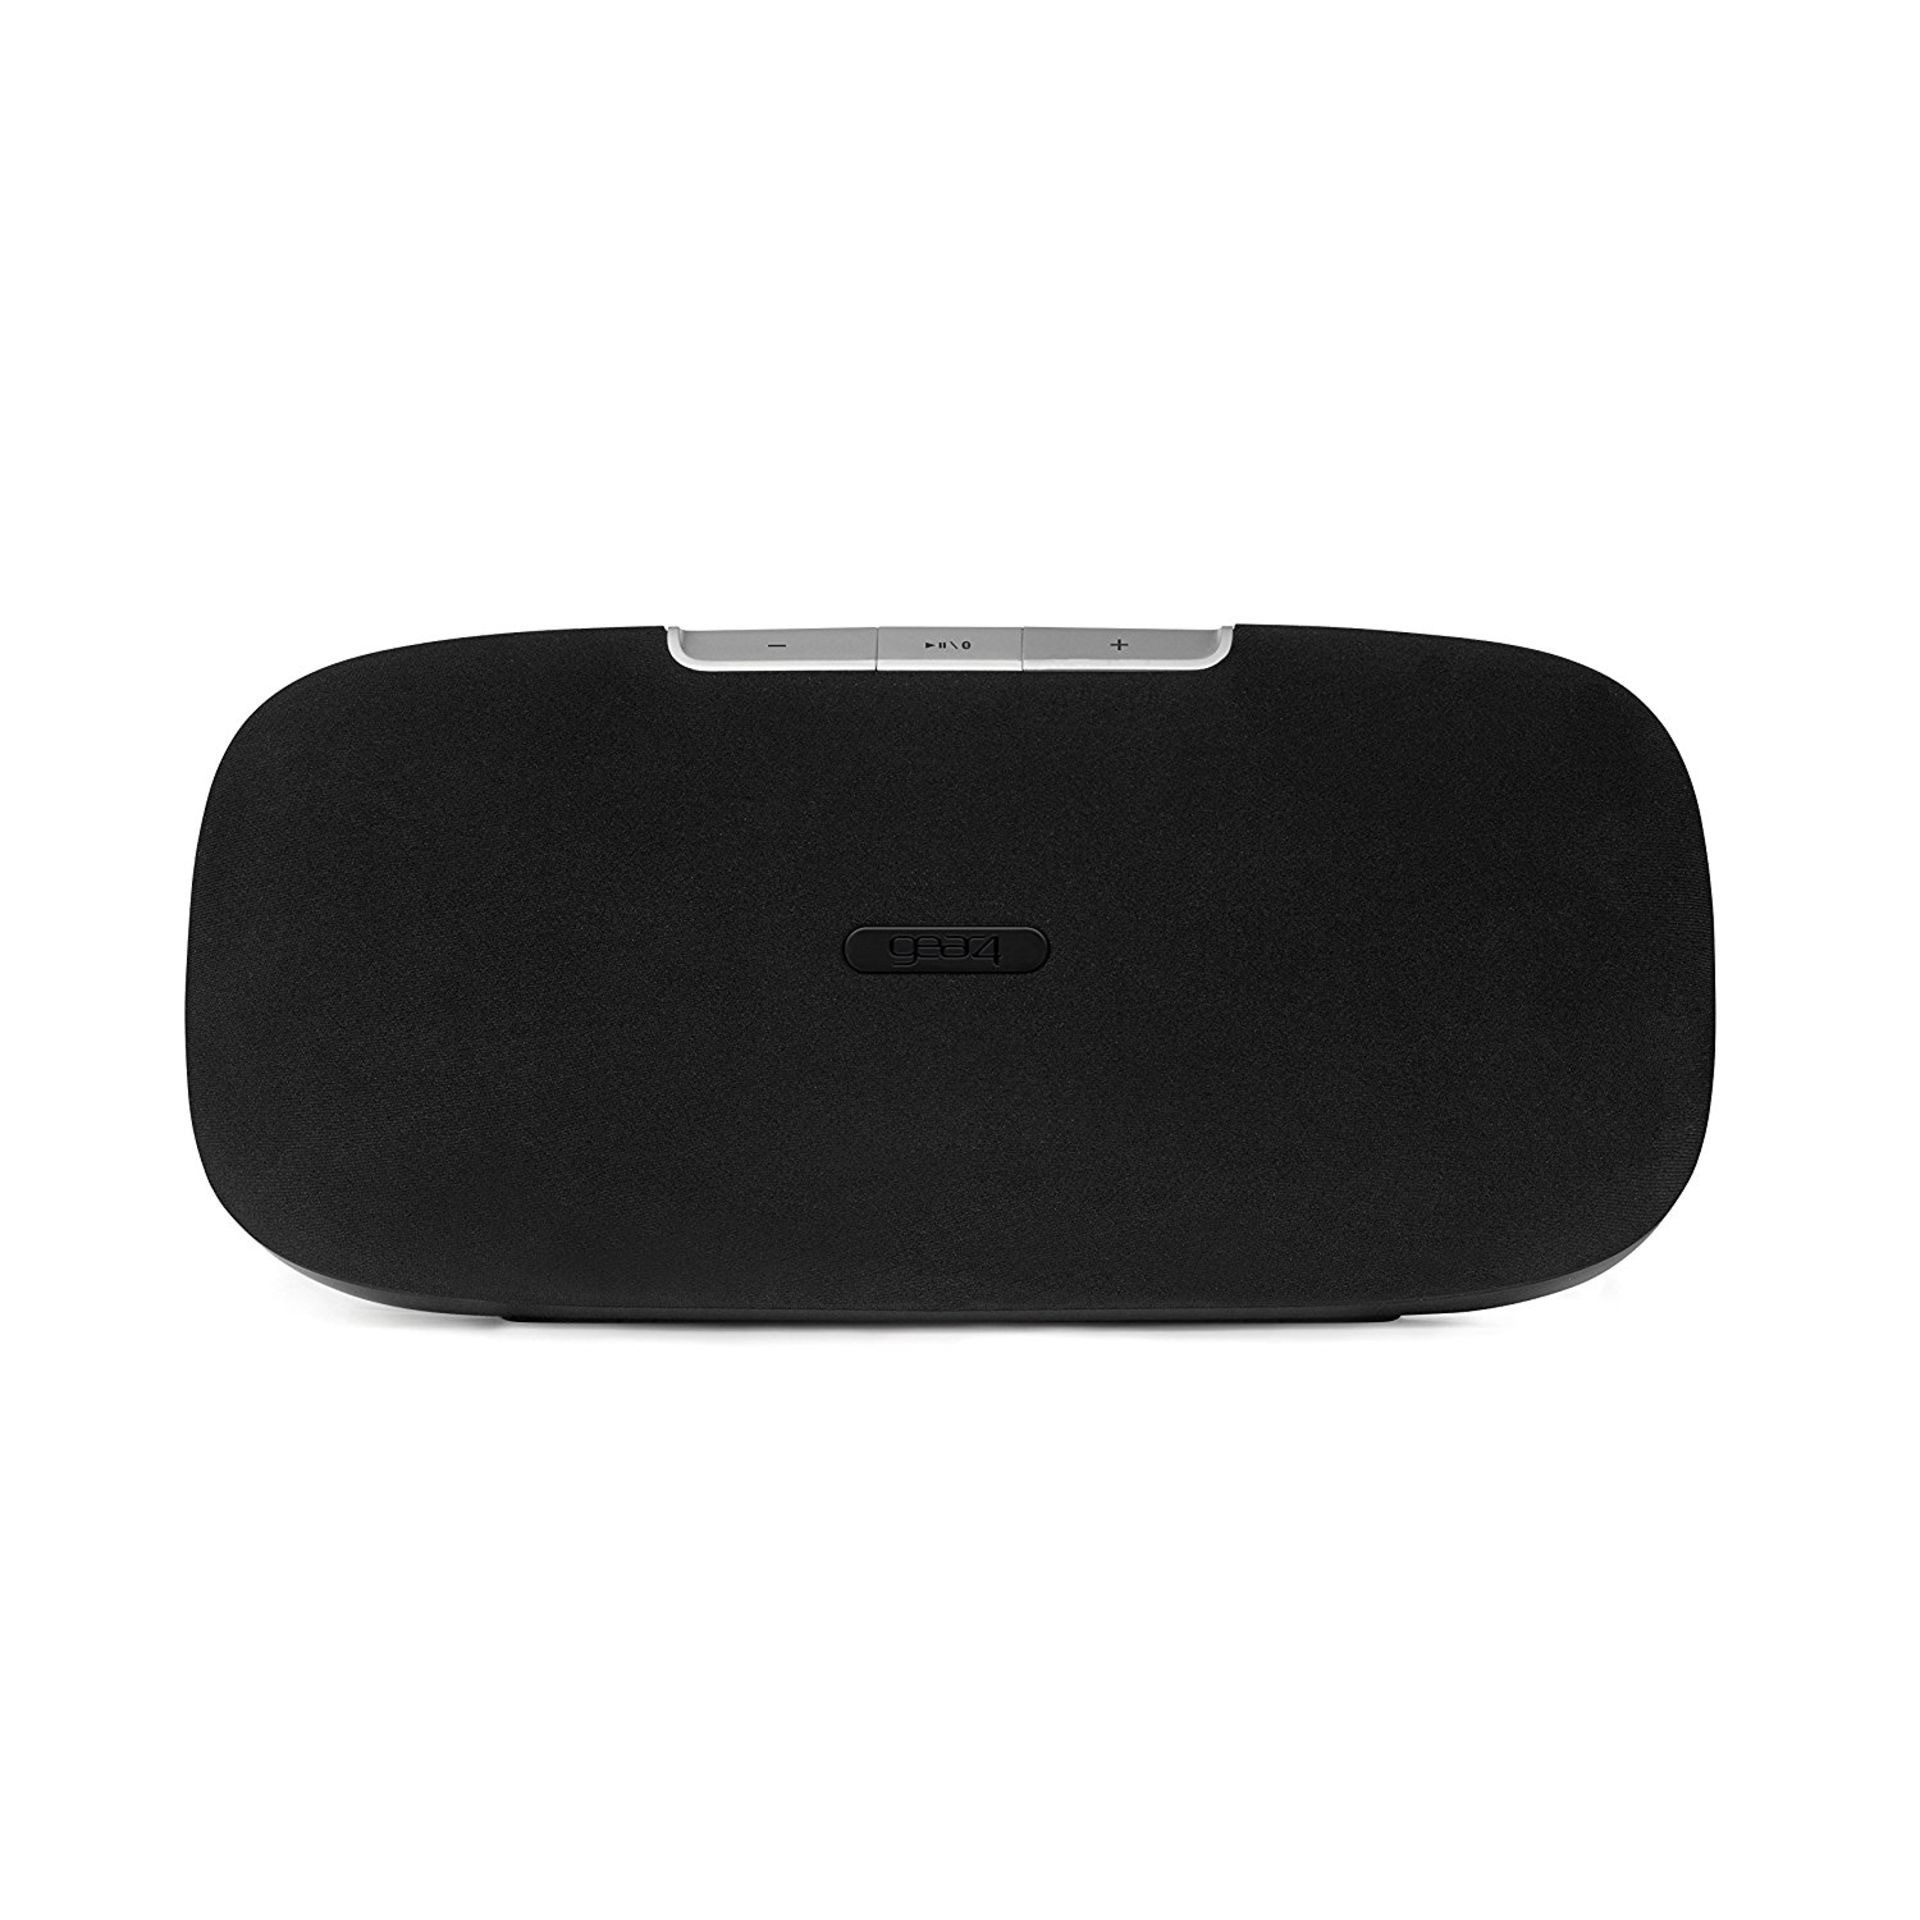 V Brand New Gear4 House Party 7 Bluetooth Wireless Speaker - Line-in Port for other devices - Bass - Image 2 of 2